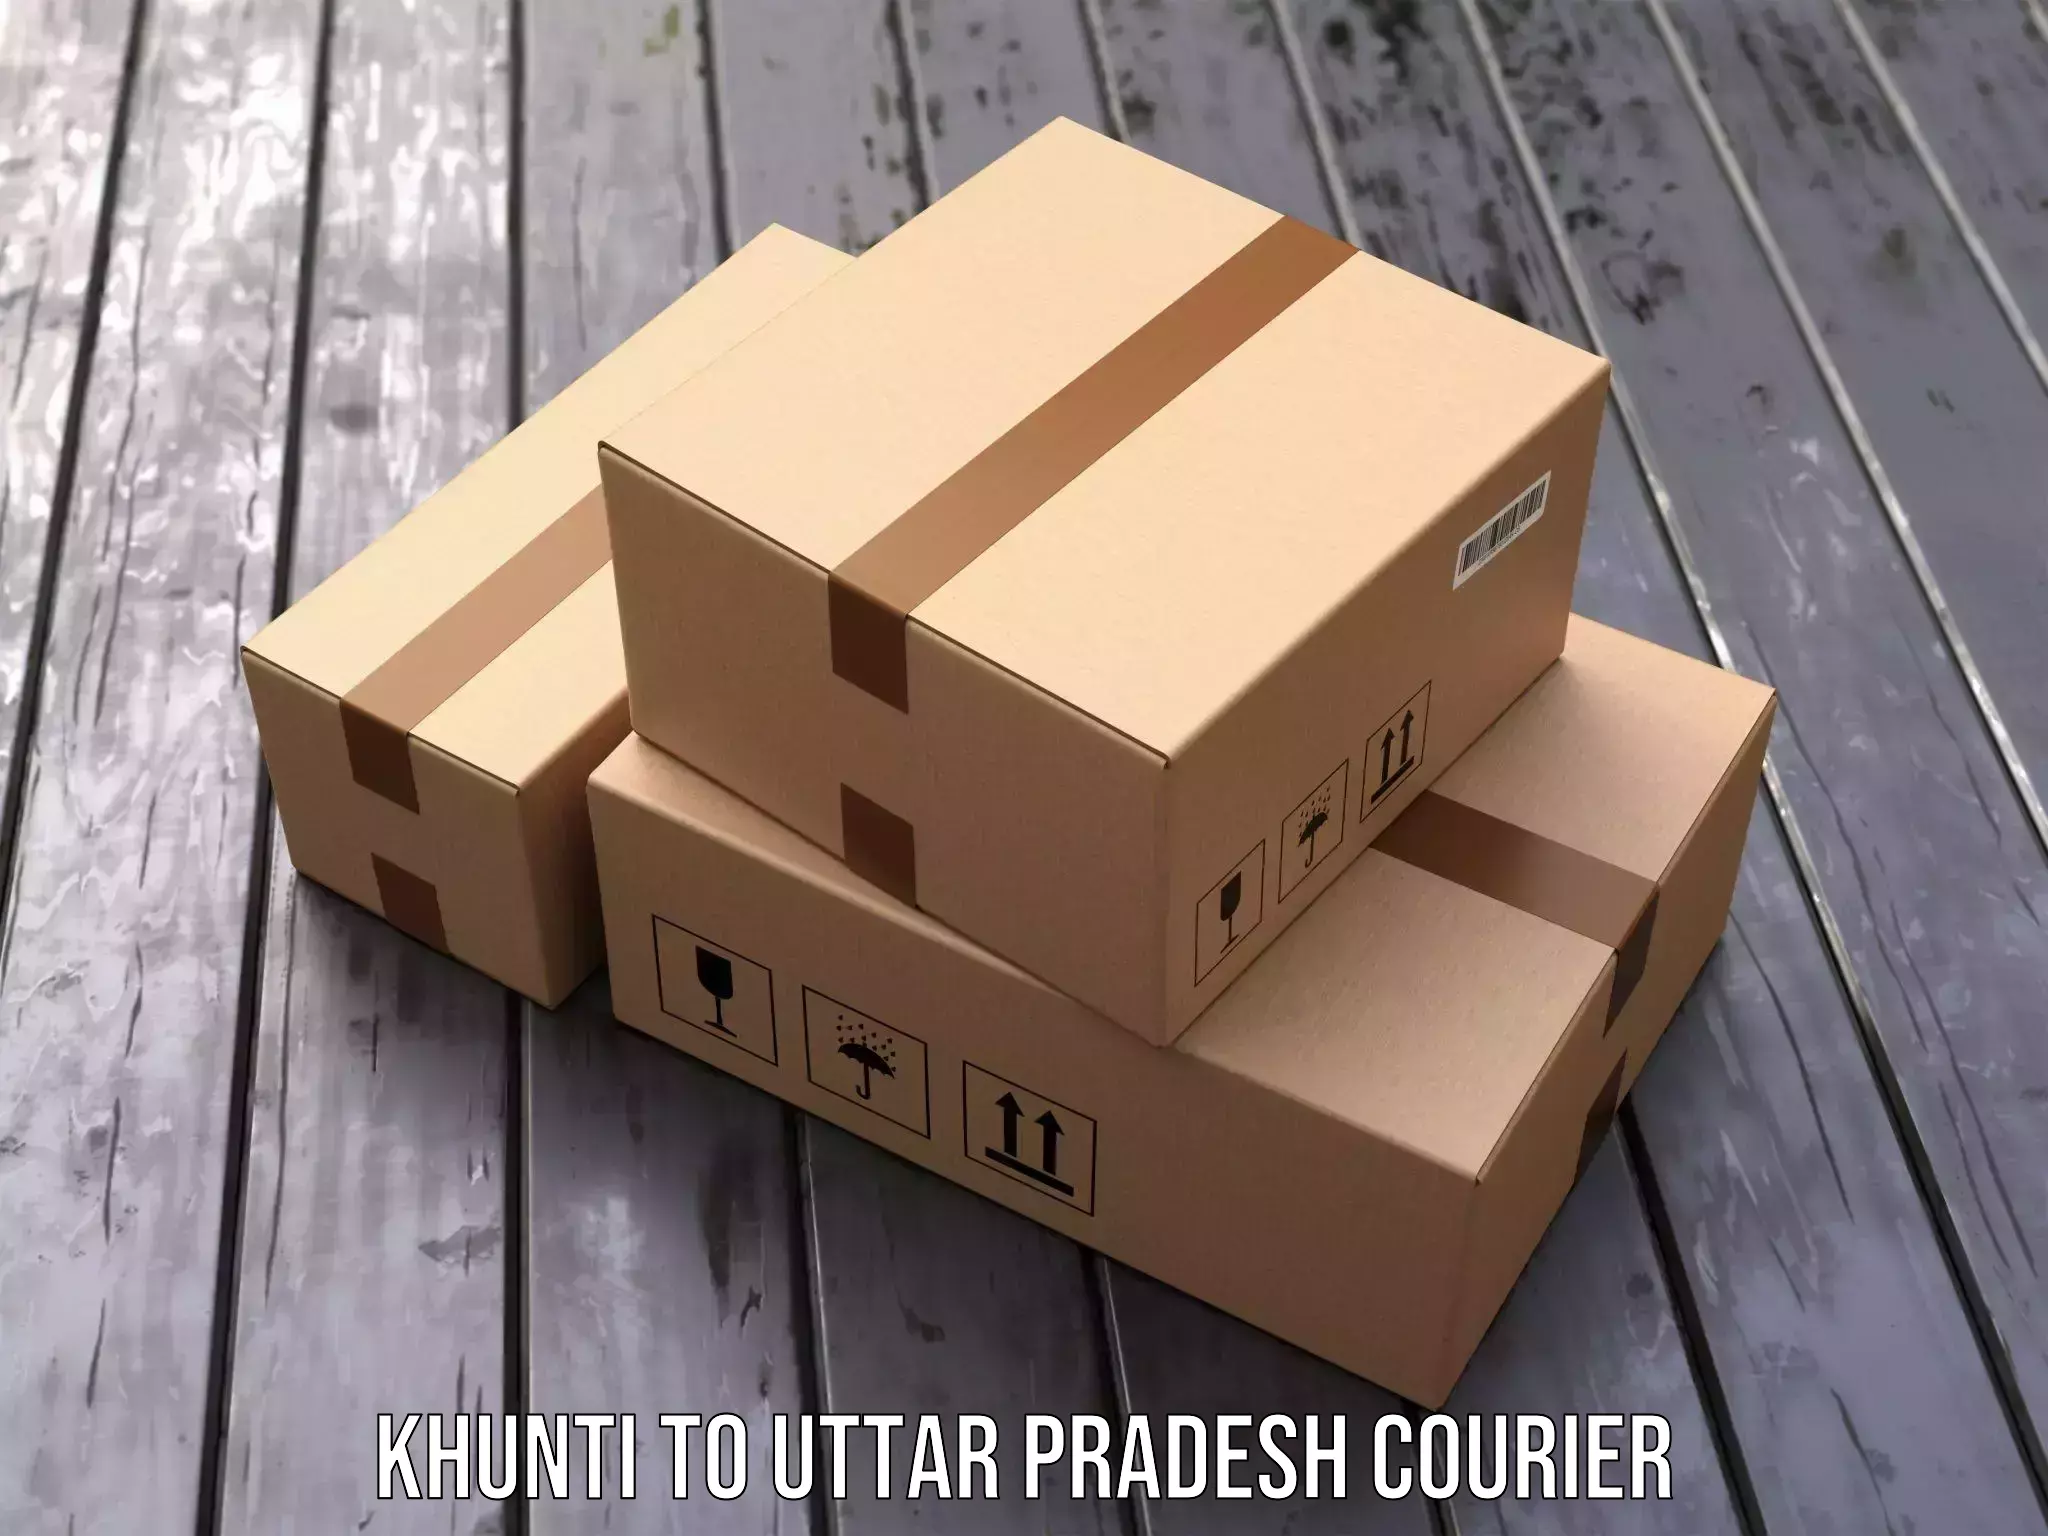 High-priority parcel service Khunti to Khatauli